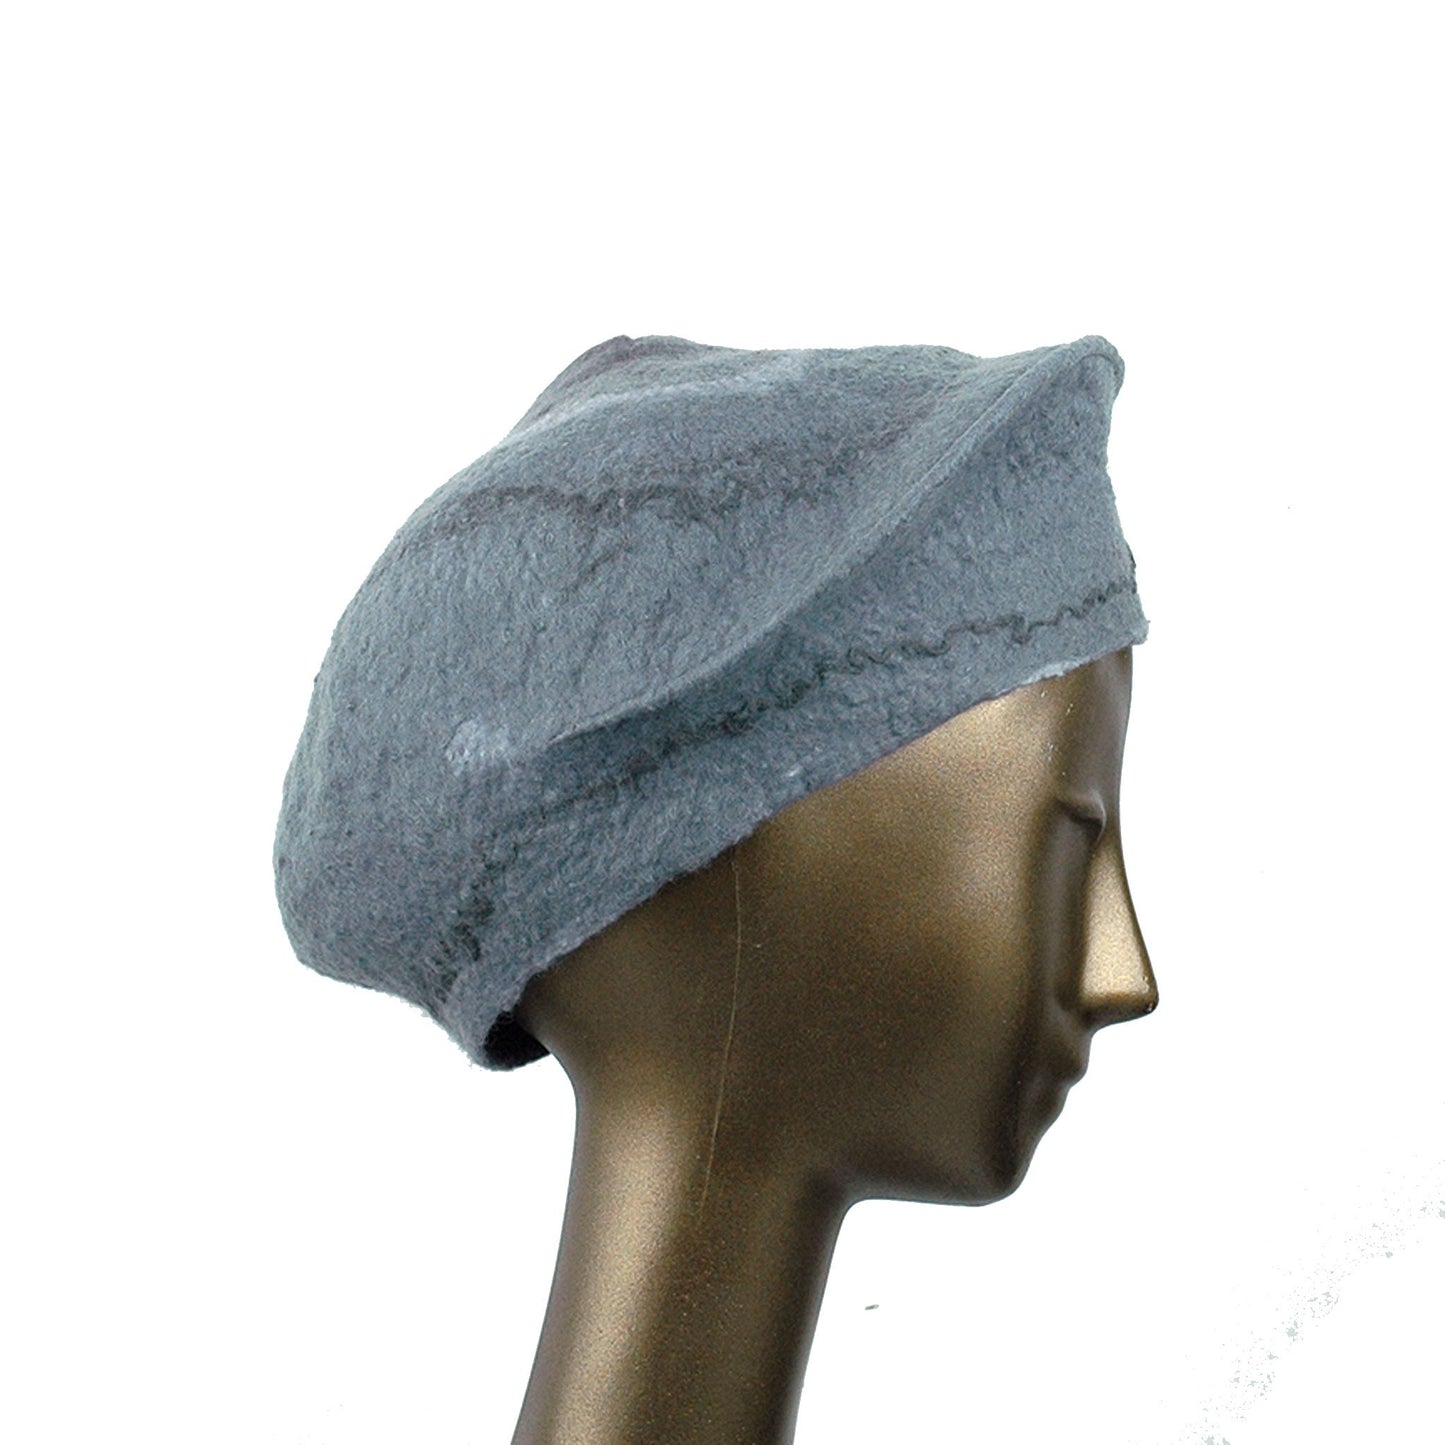 Gray Felted Beret with Crater on Top - side view